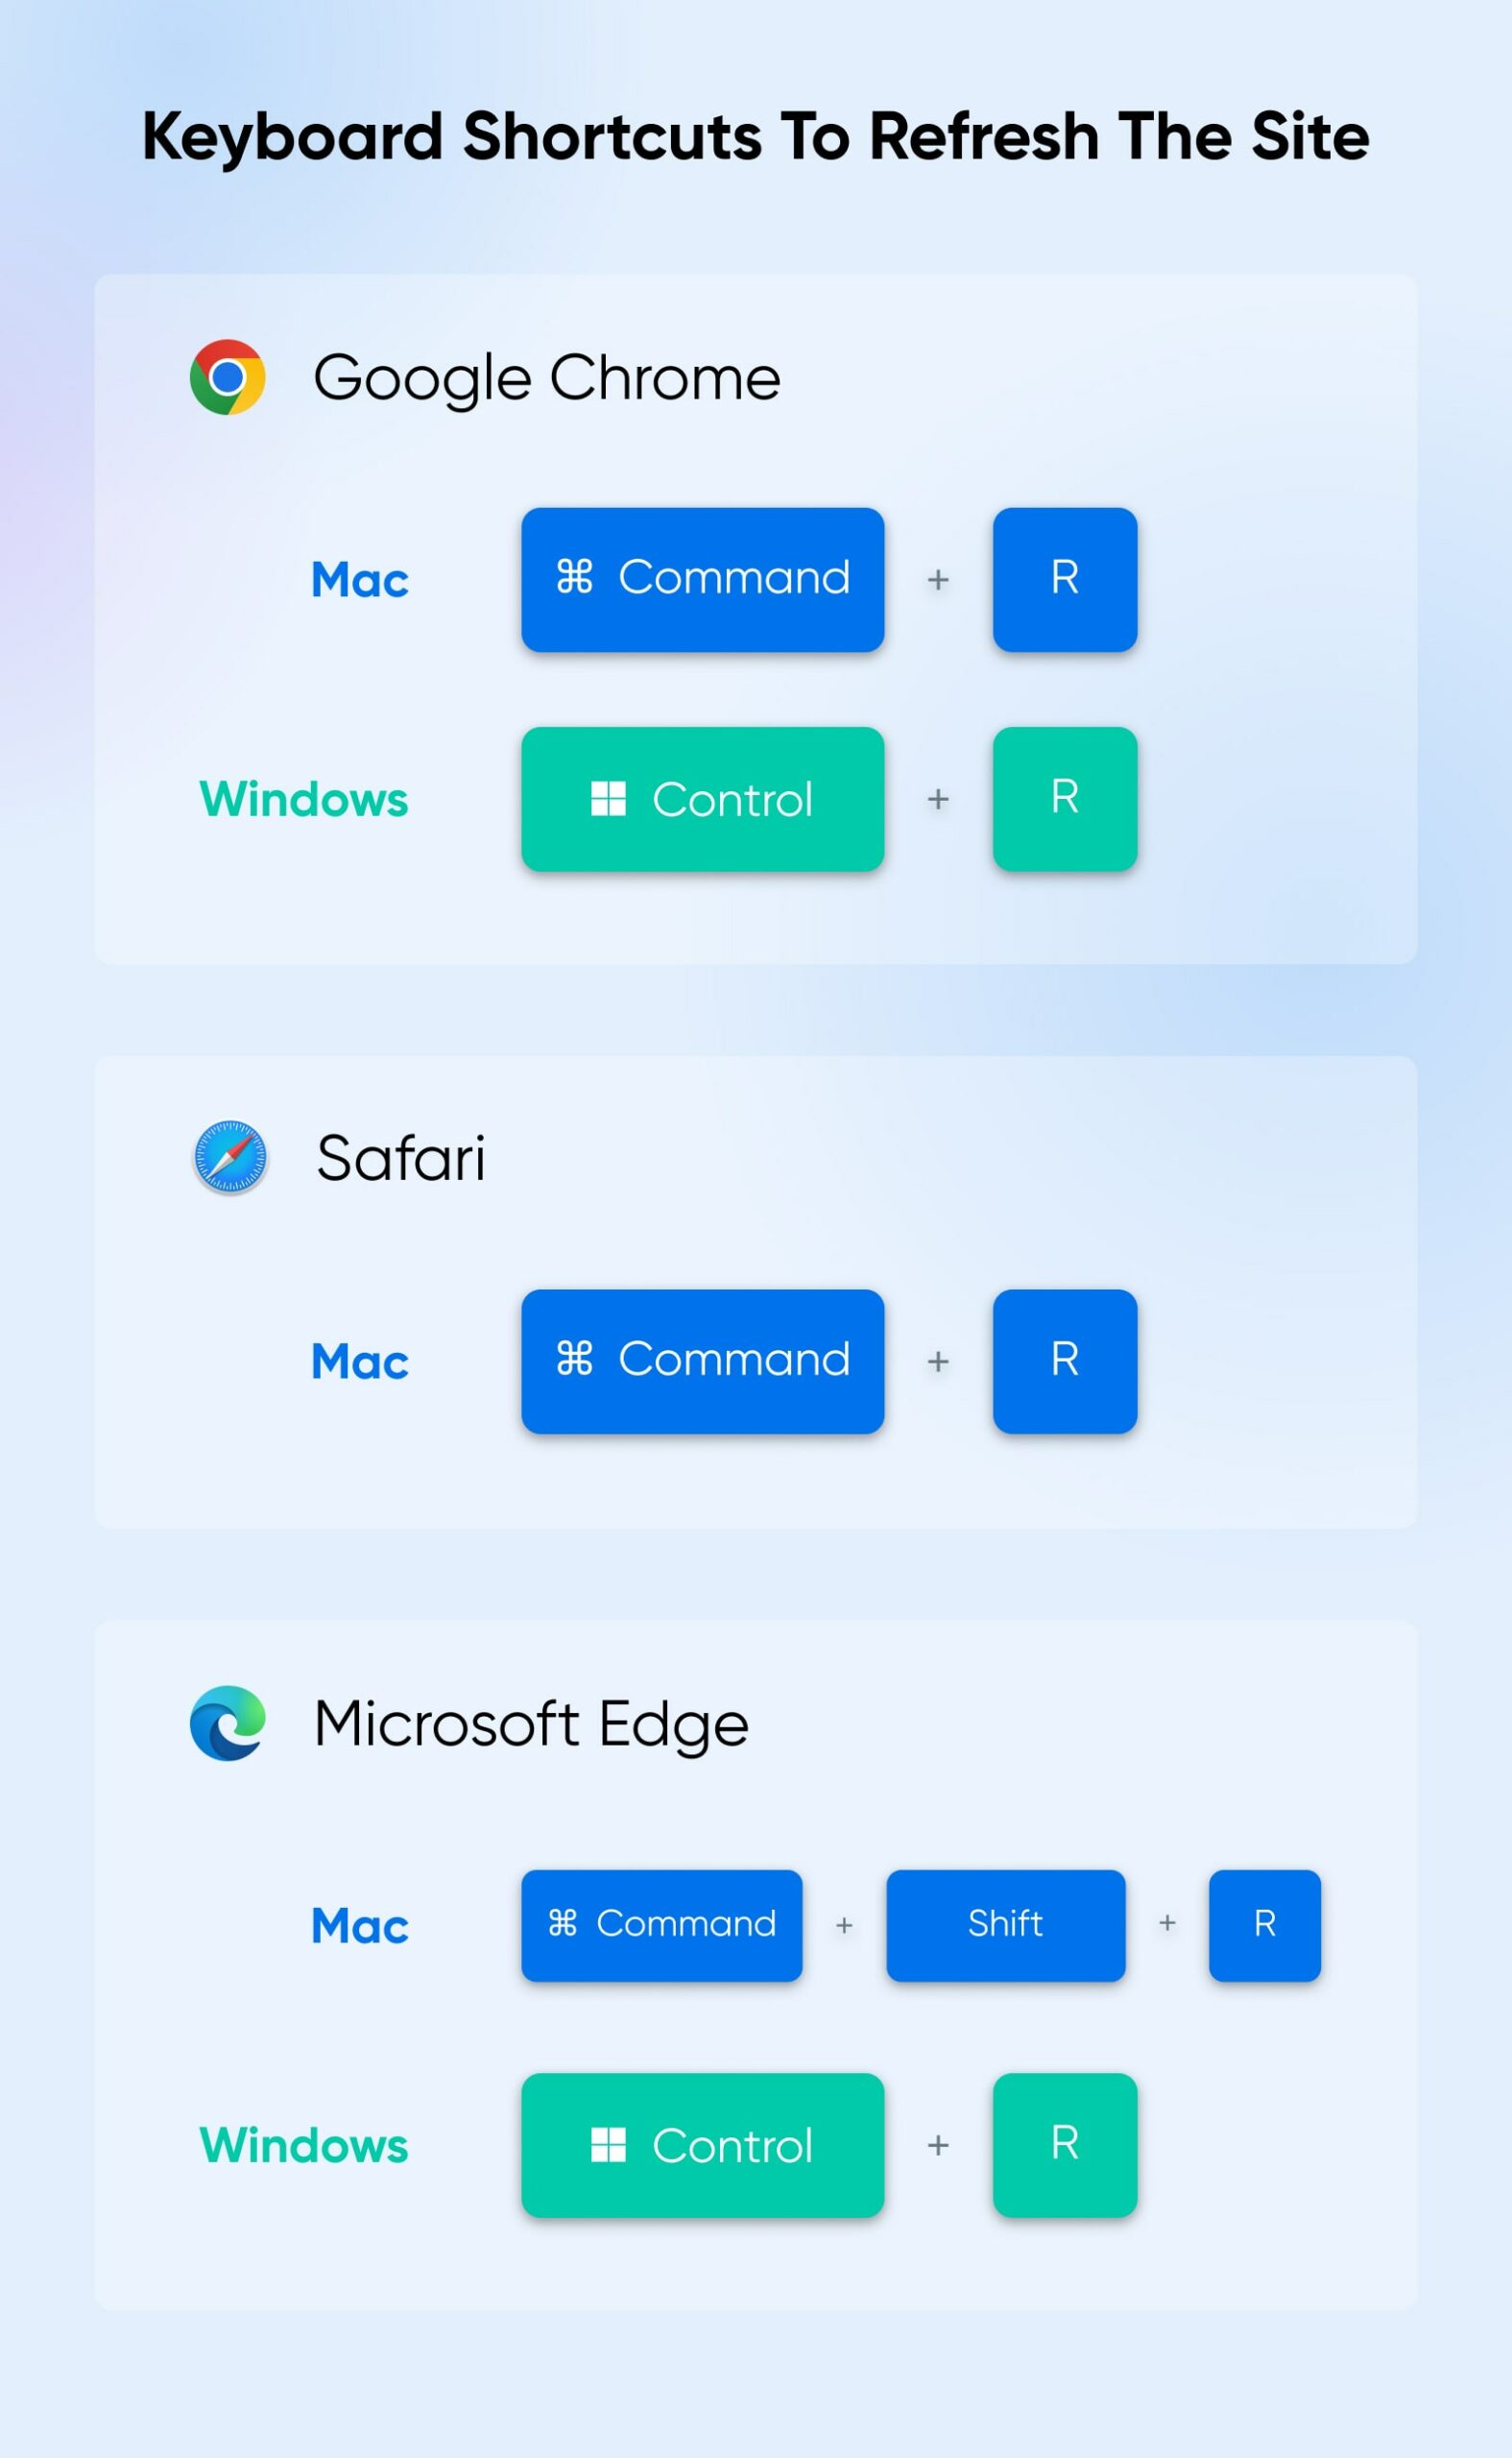 "Keyboard Shortcuts To Refresh The Site" diagram with commands for Google Chrome, Safari, and Microsoft Edge.